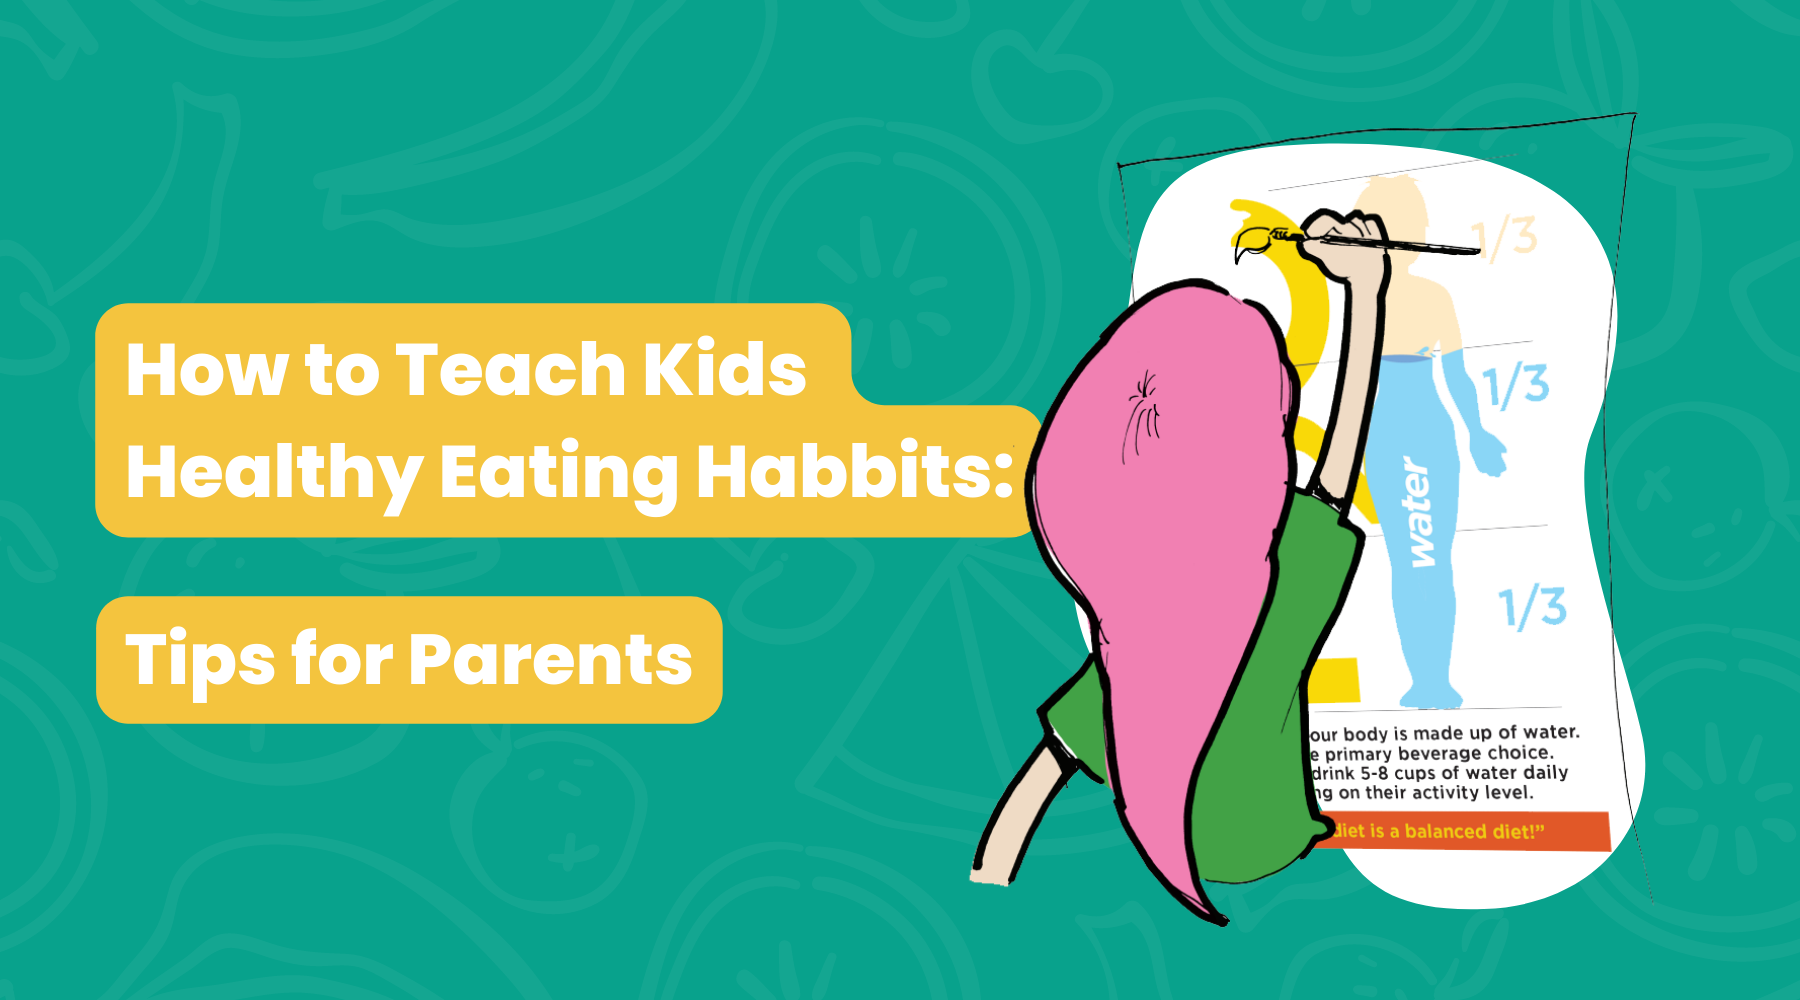 How to Teach Kids Healthy Eating Habits: Tips for Parents